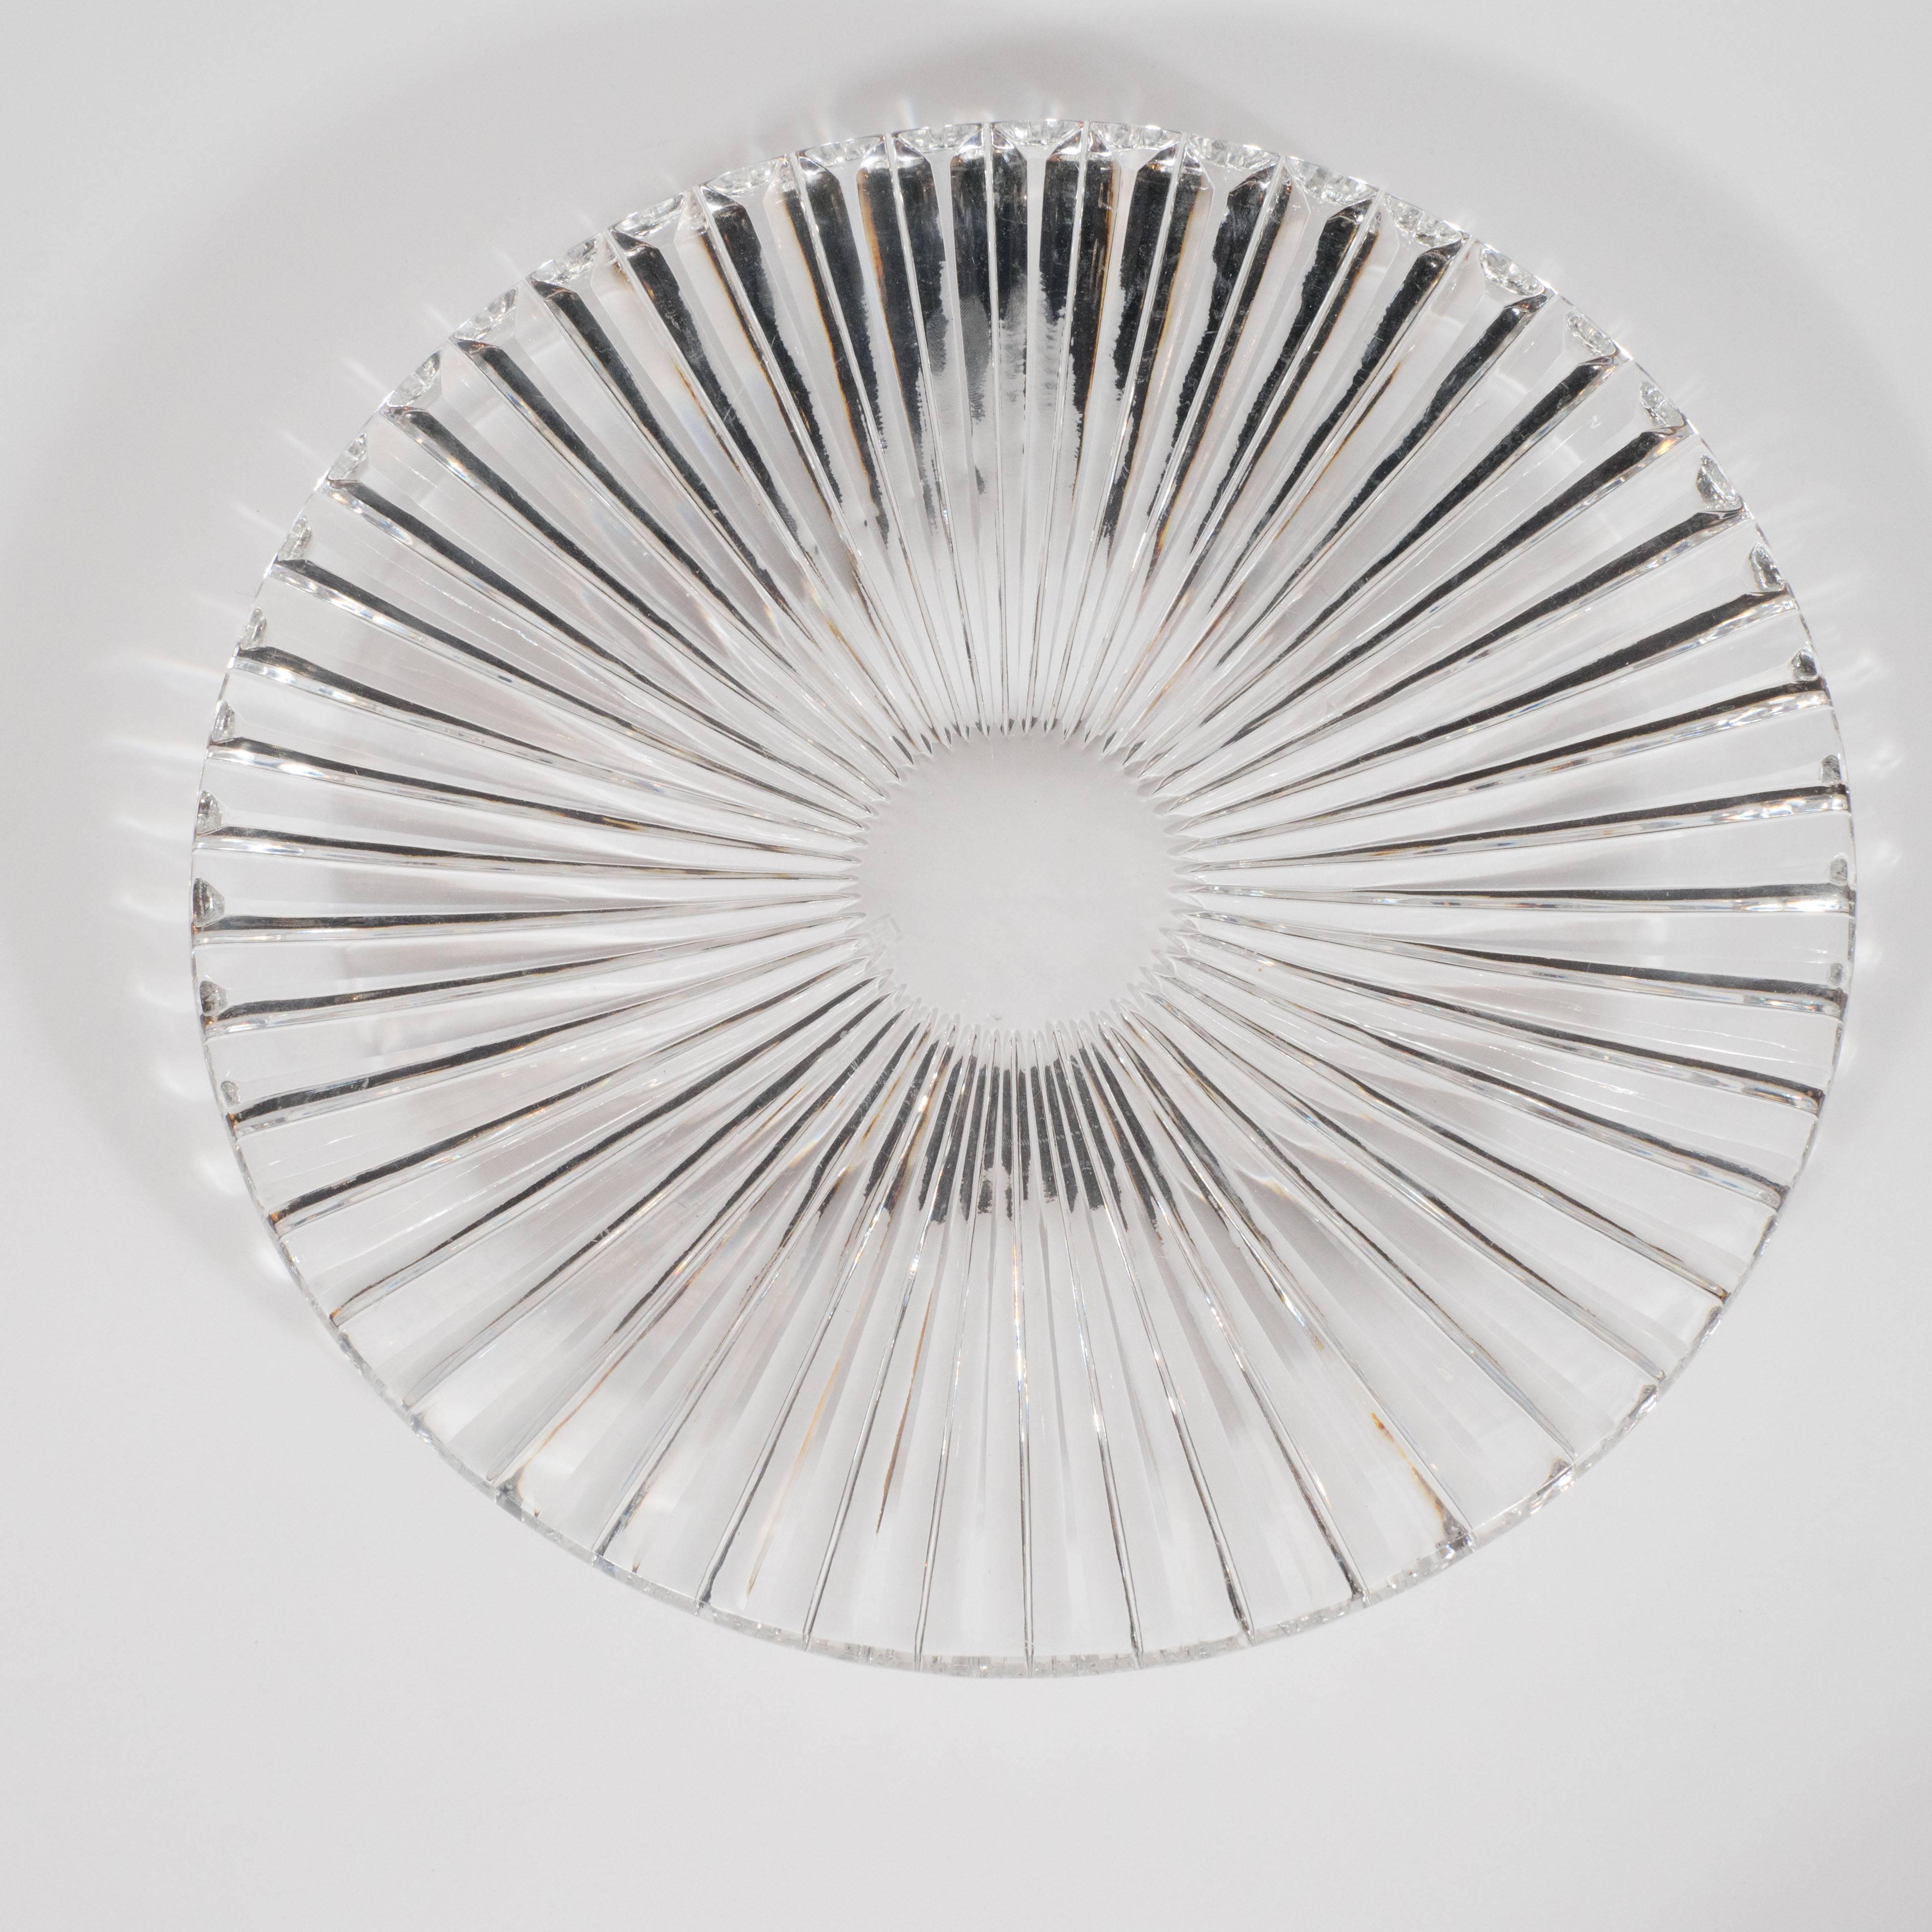 American Sophisticated Mid-Century Modern Sunburst Etched Crystal Serving Plate For Sale